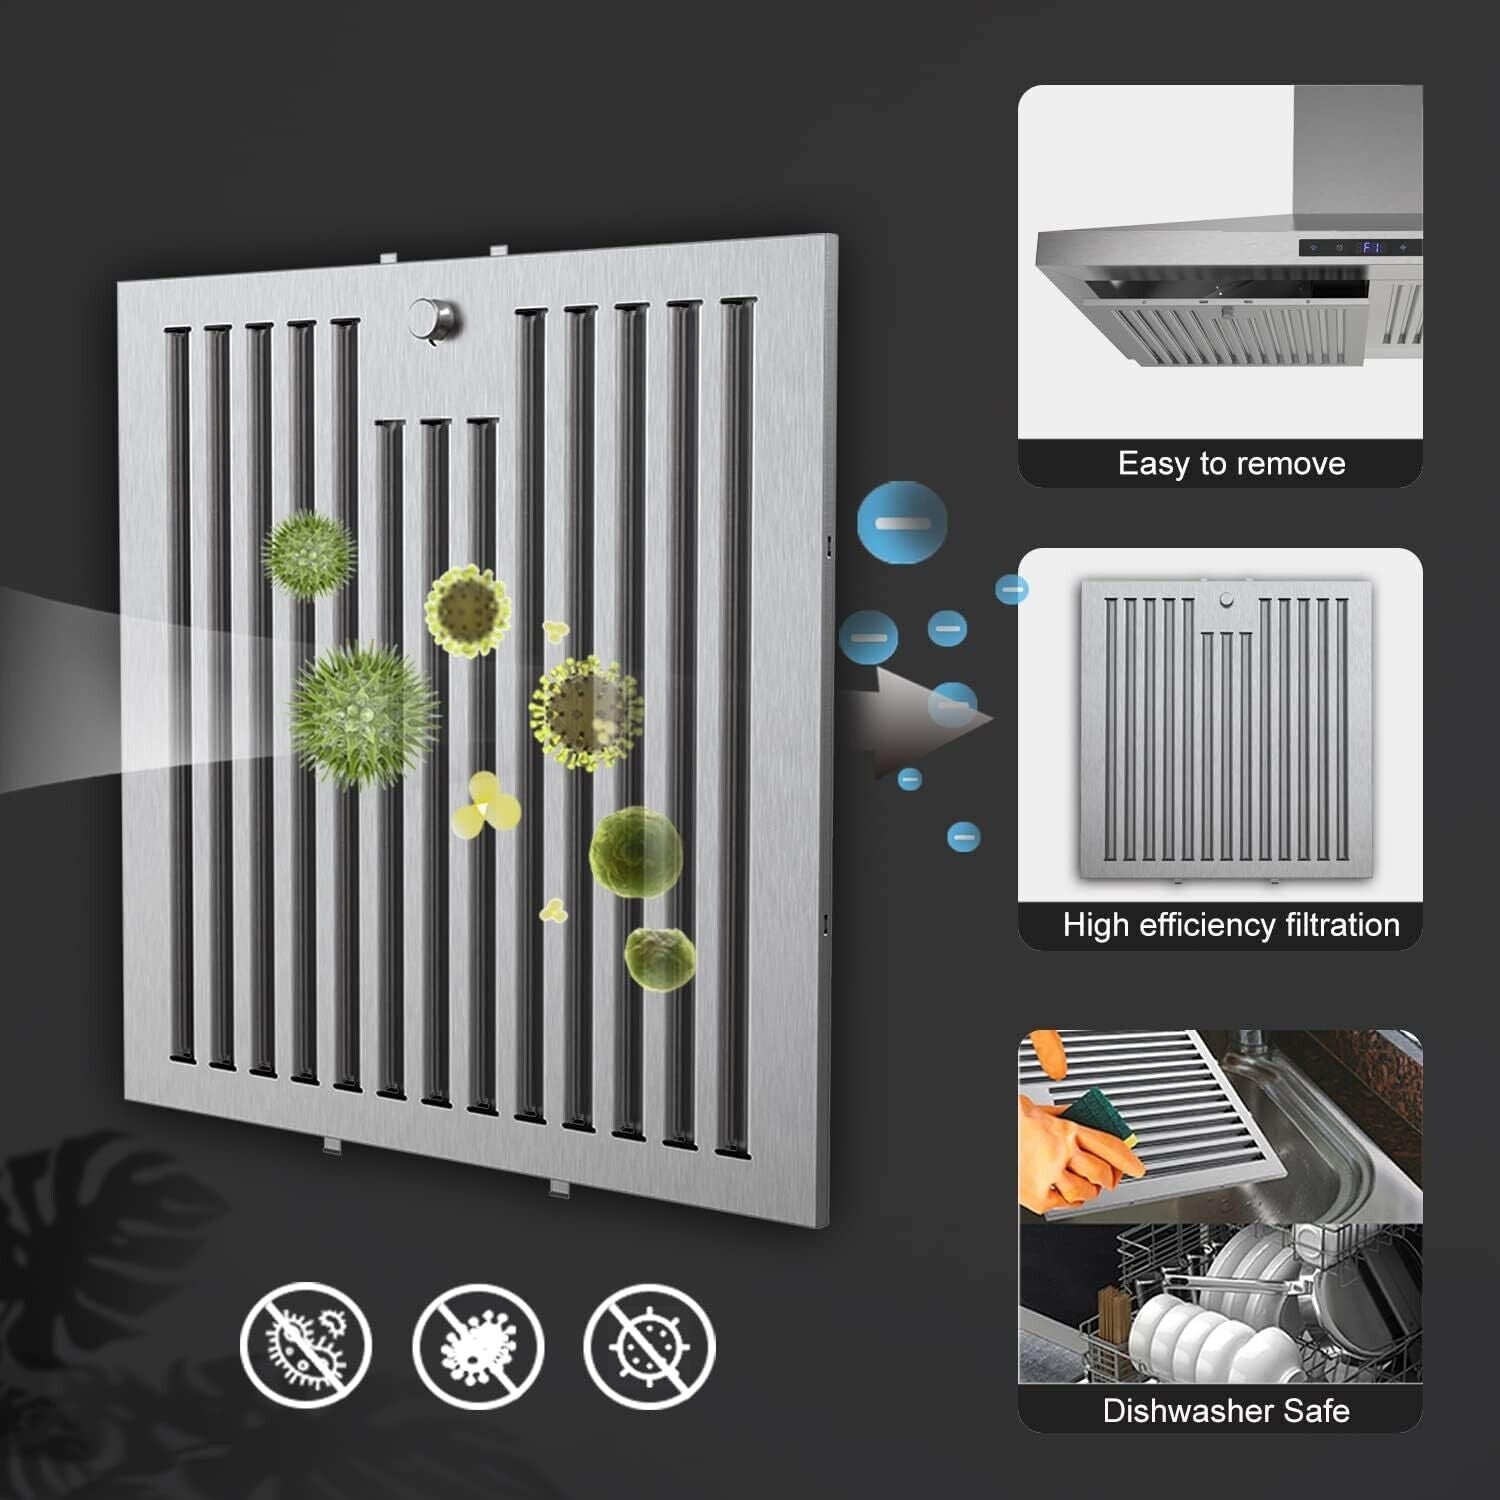 Tieasy 36in Wall Mount Hood Stainless Steel Kitchen Stove Vent 700CFM 3-Speed Fan - 1090